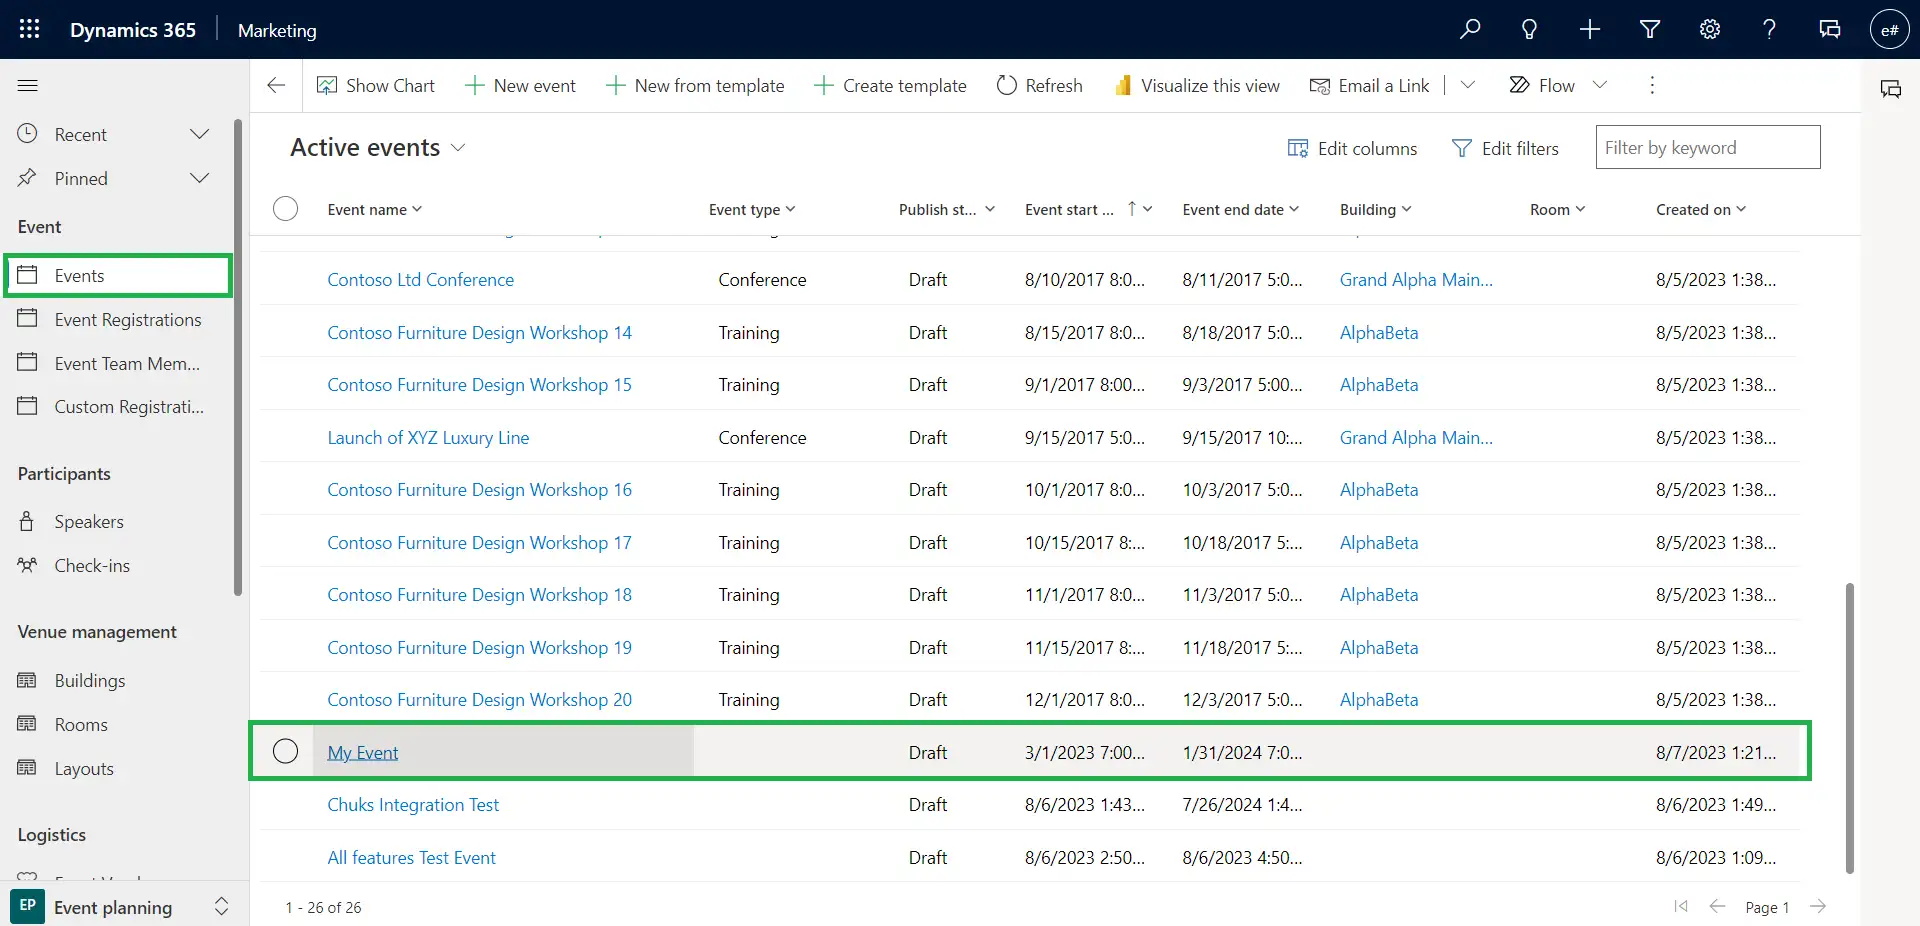 Image showing the Events tab in Microsoft Dynamics and how it displays all the events you have synced